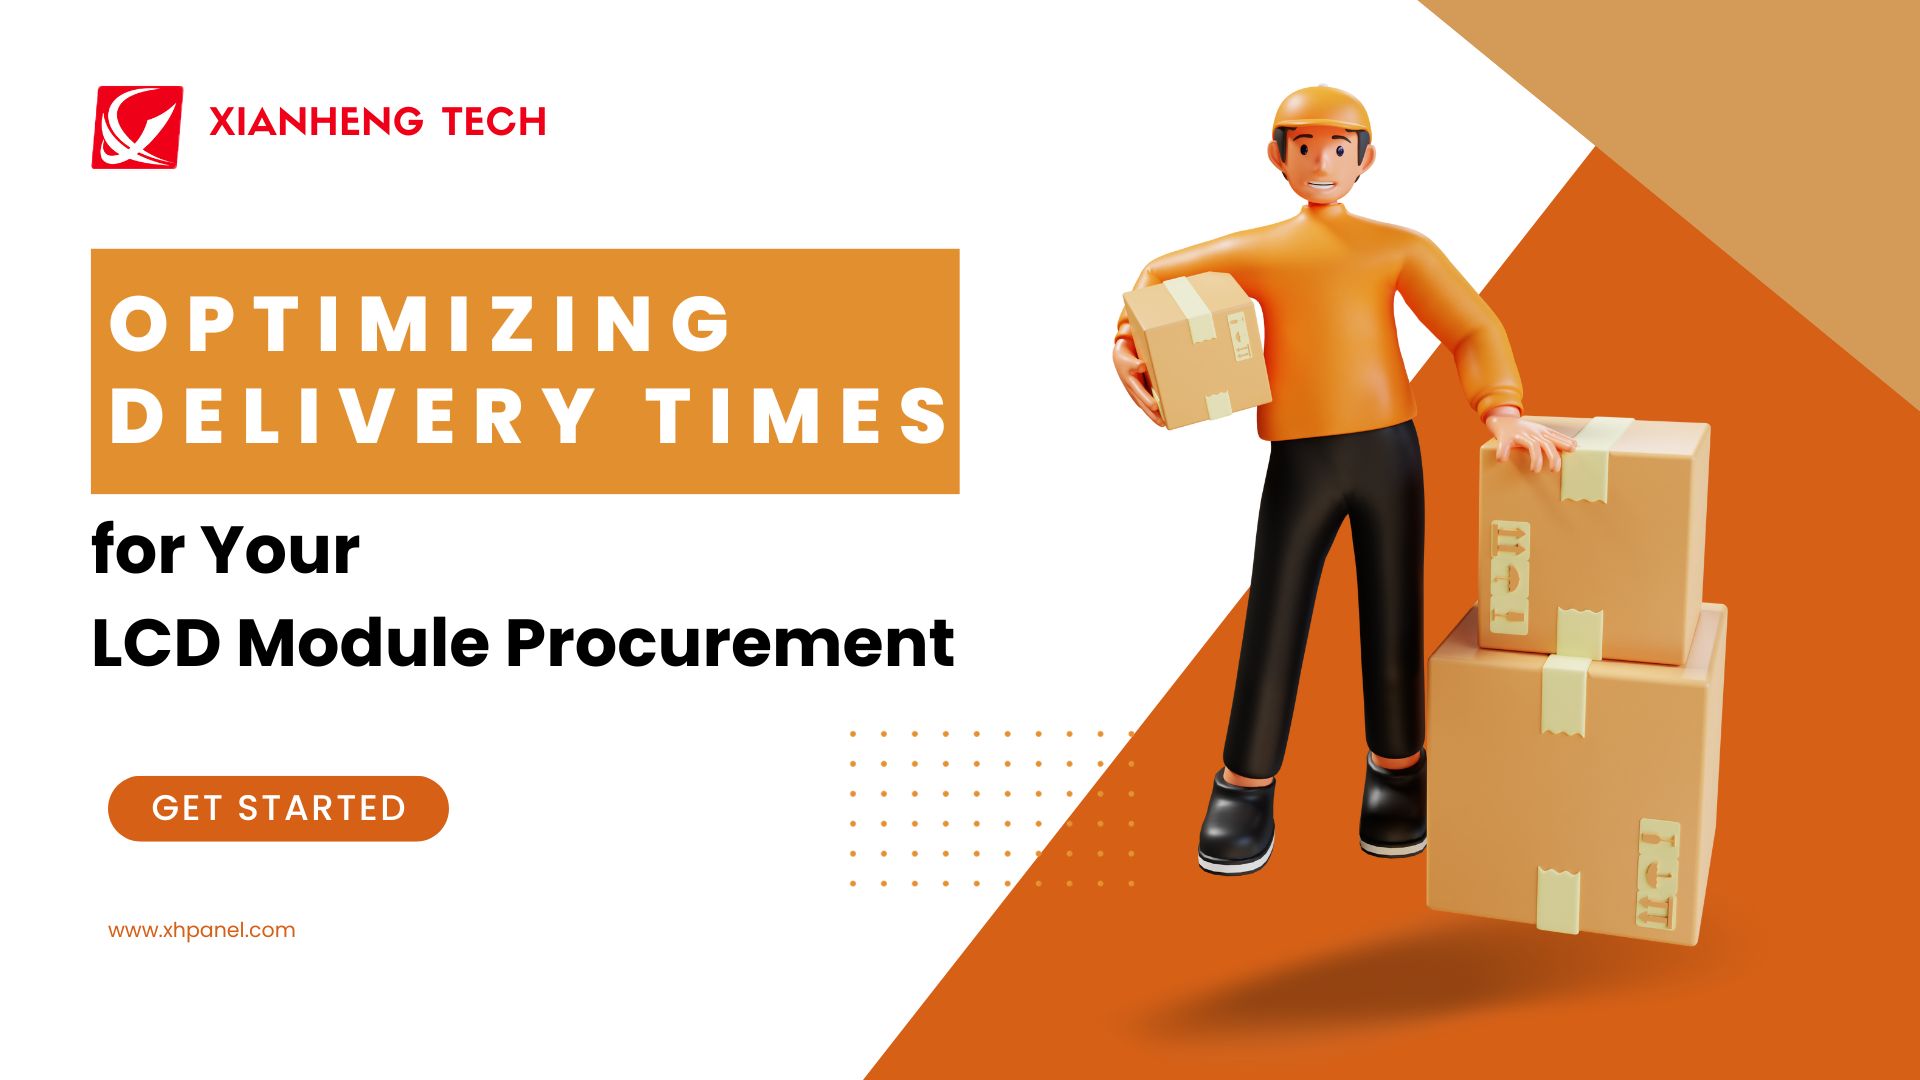 Optimizing Delivery Times for Your LCD Module Procurement